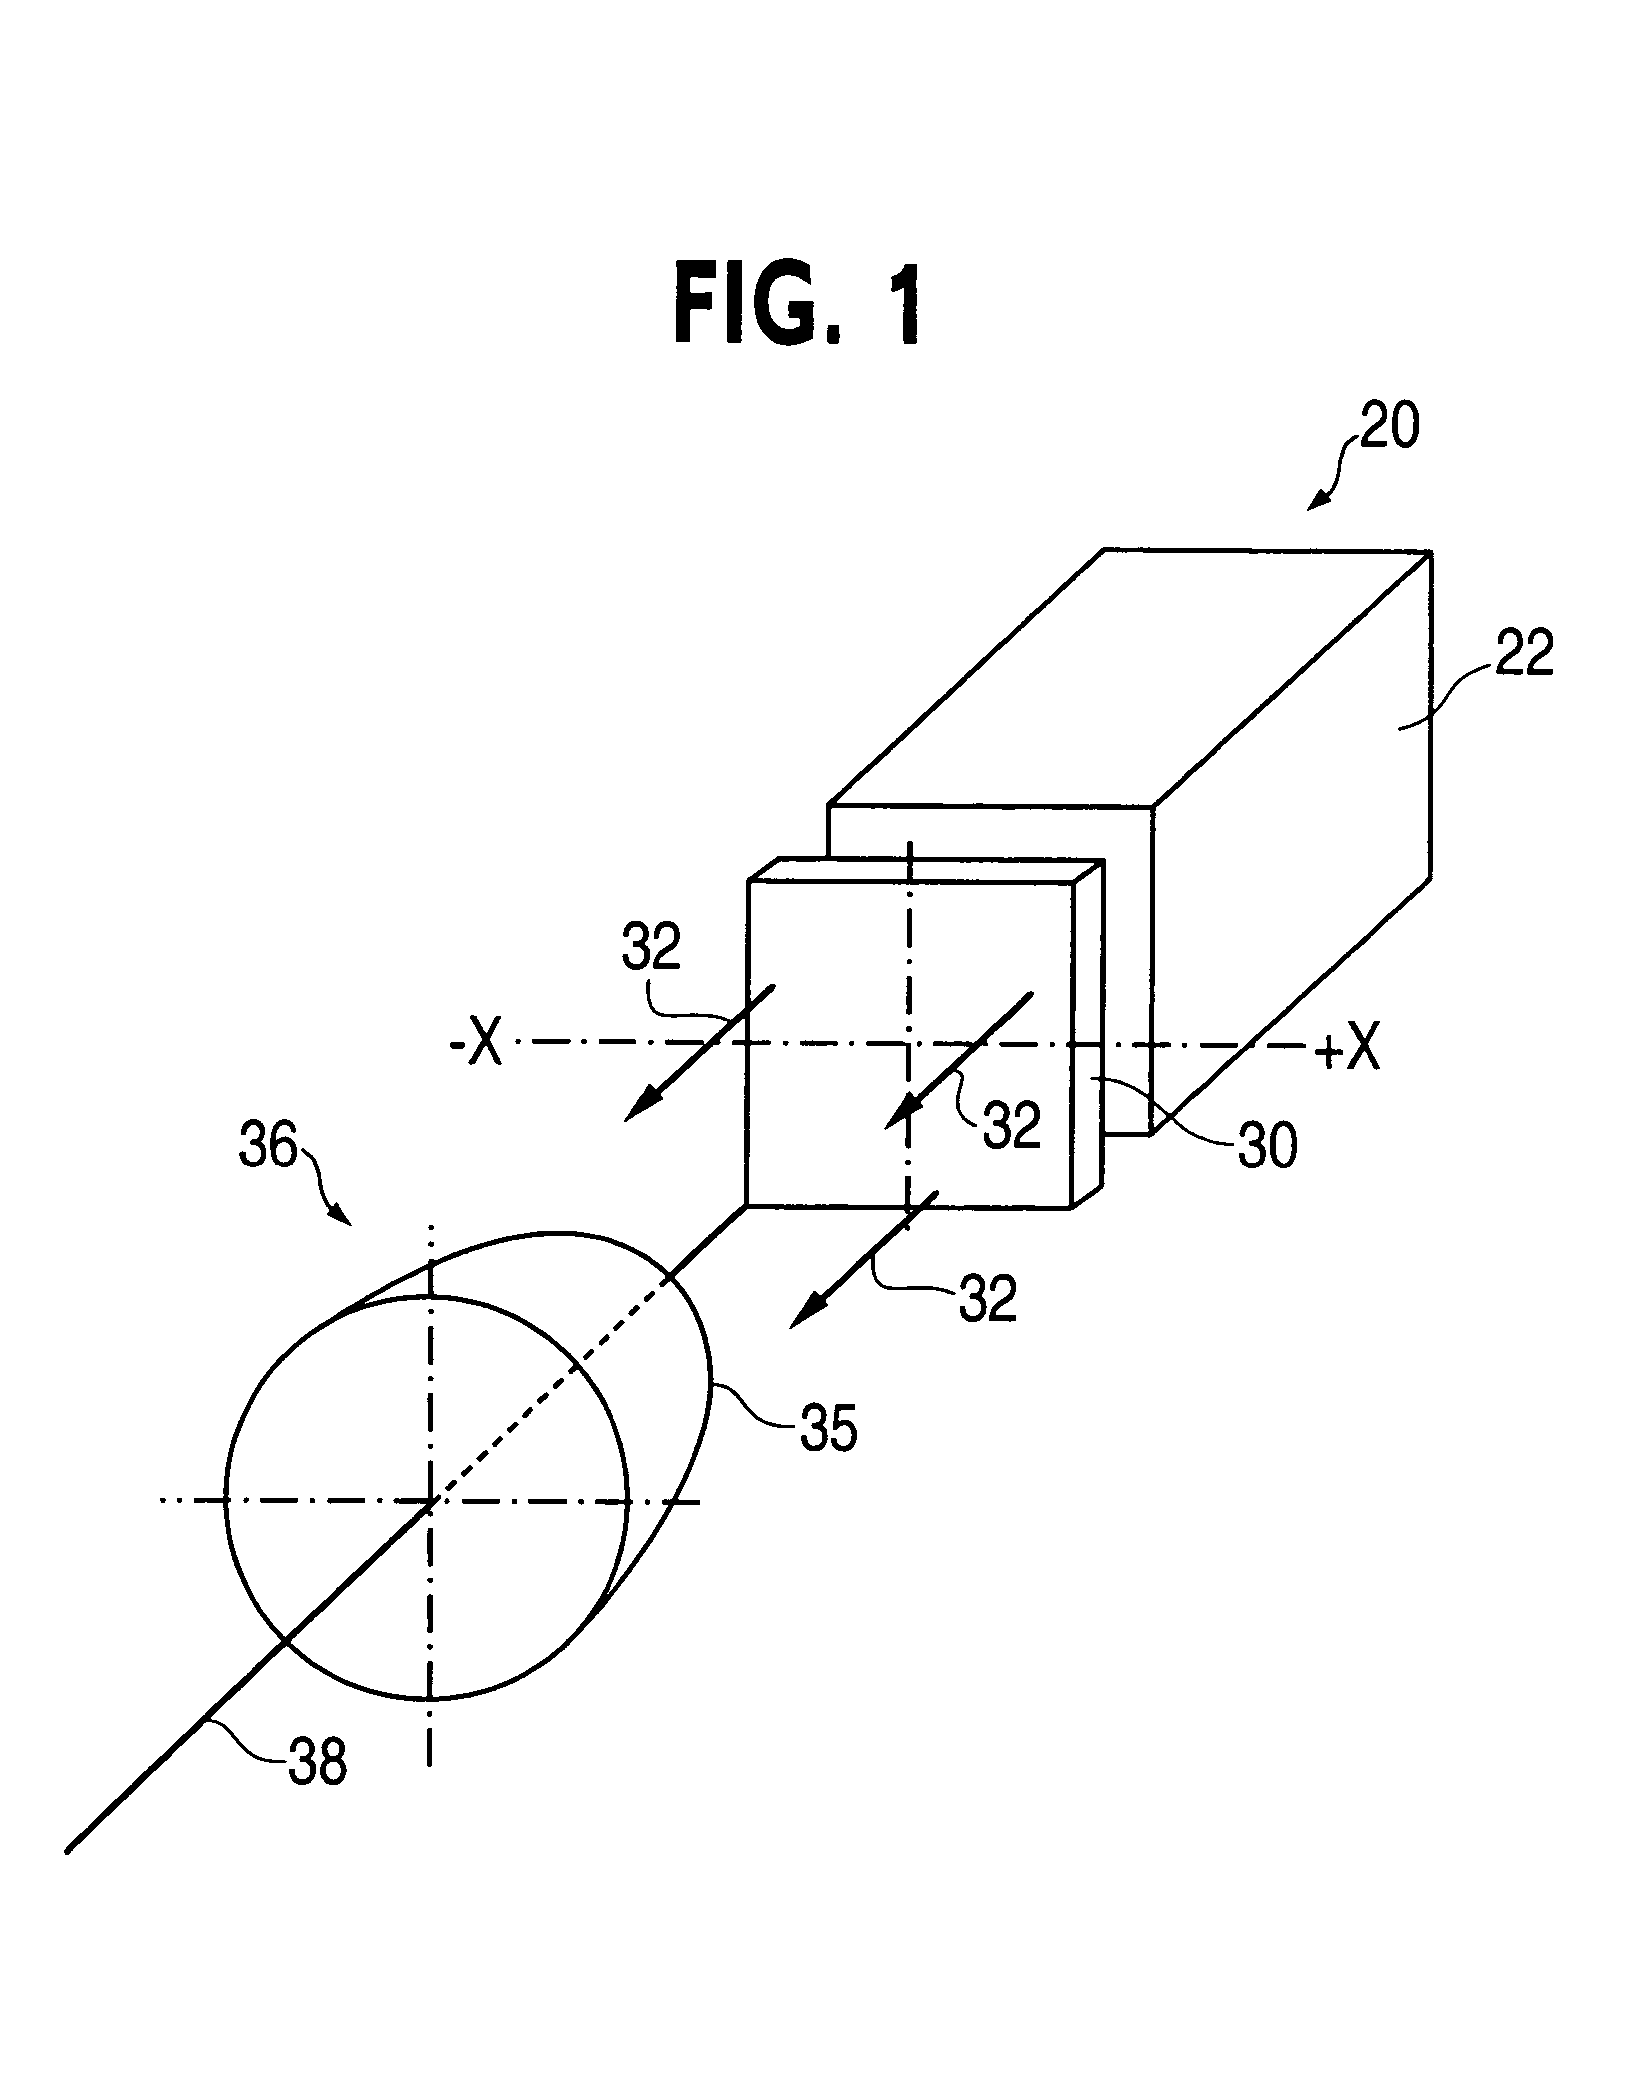 Method and apparatus for improved ultraviolet (UV) treatment of large three-dimensional (3D) objects